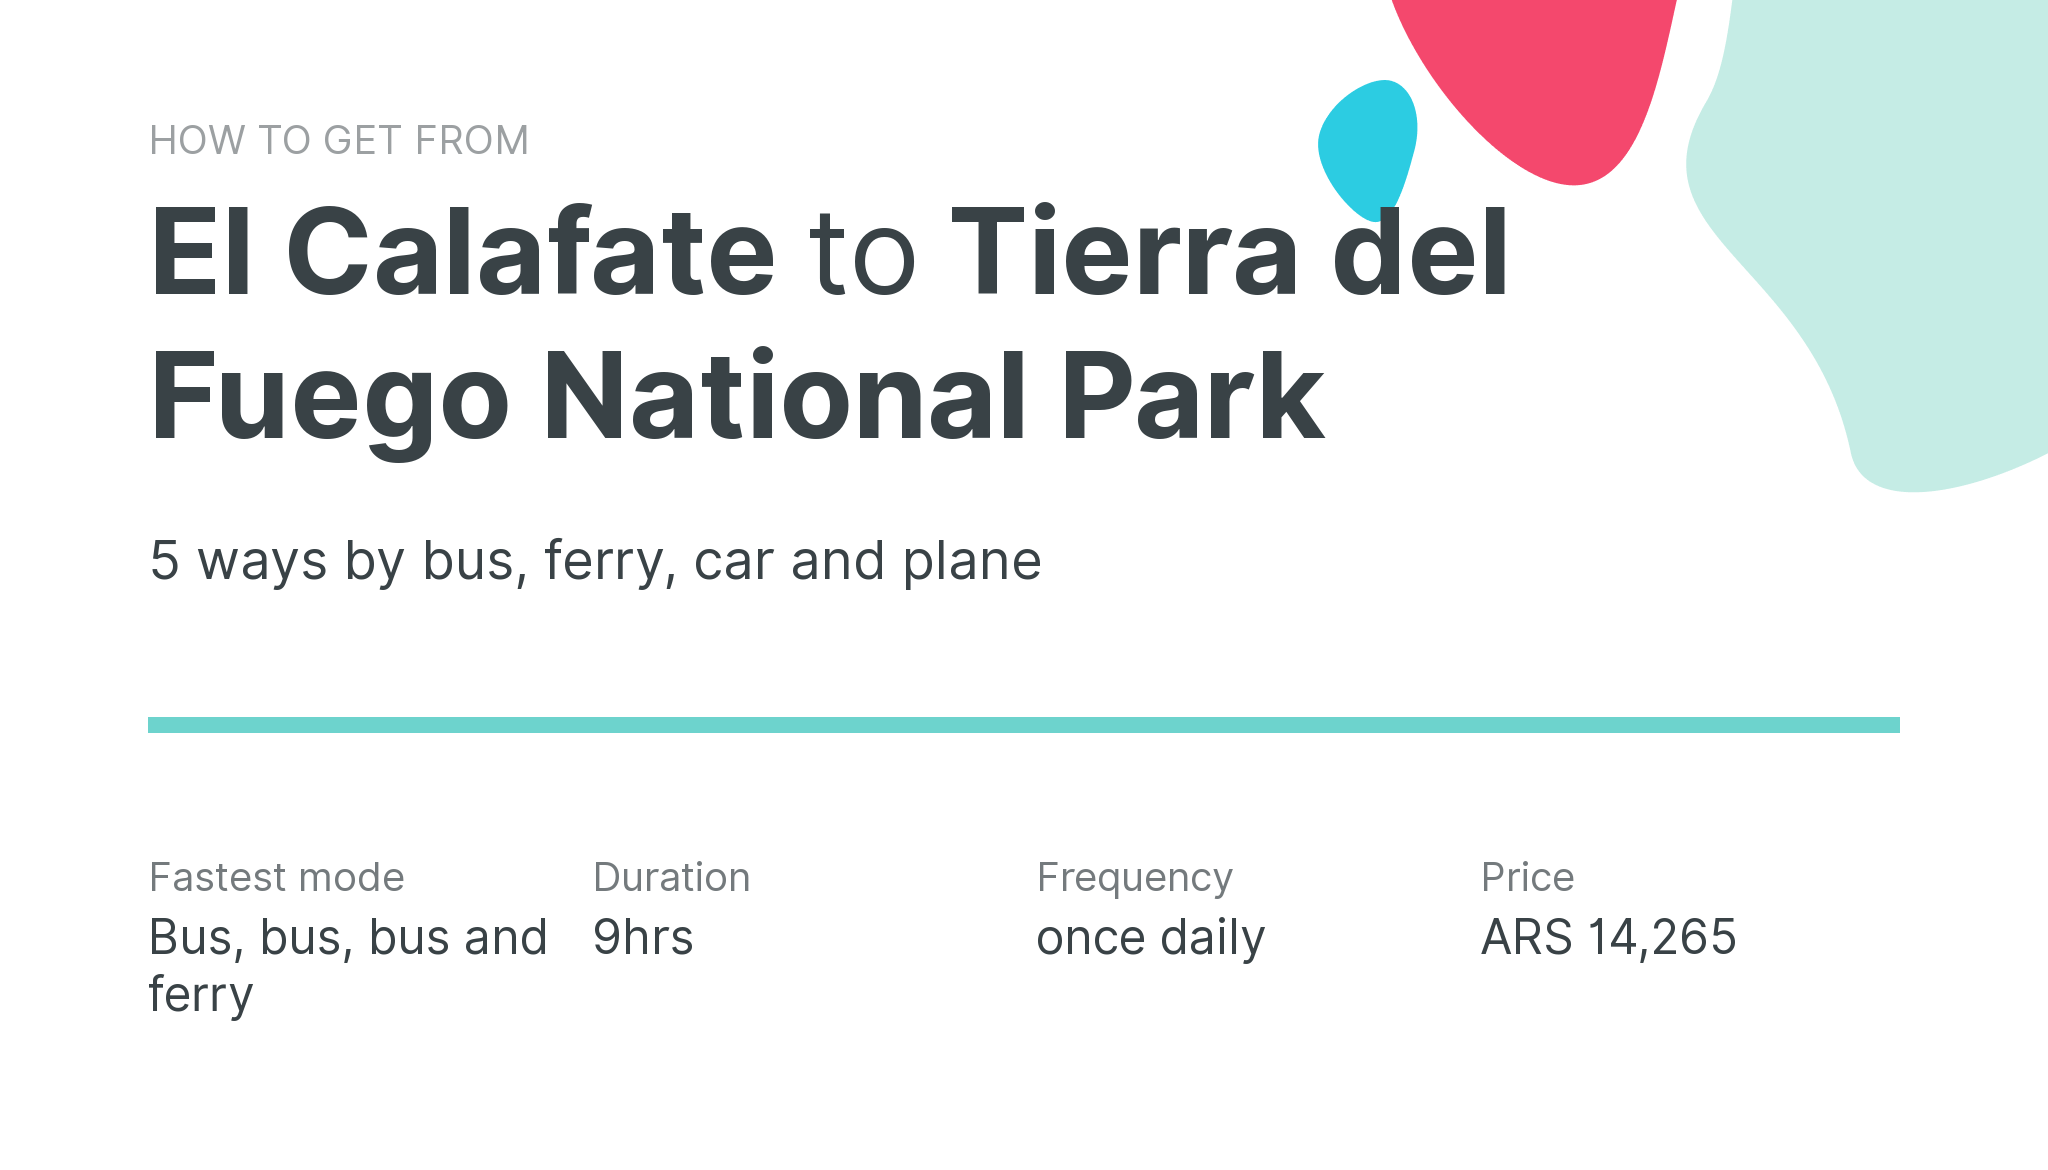 How do I get from El Calafate to Tierra del Fuego National Park